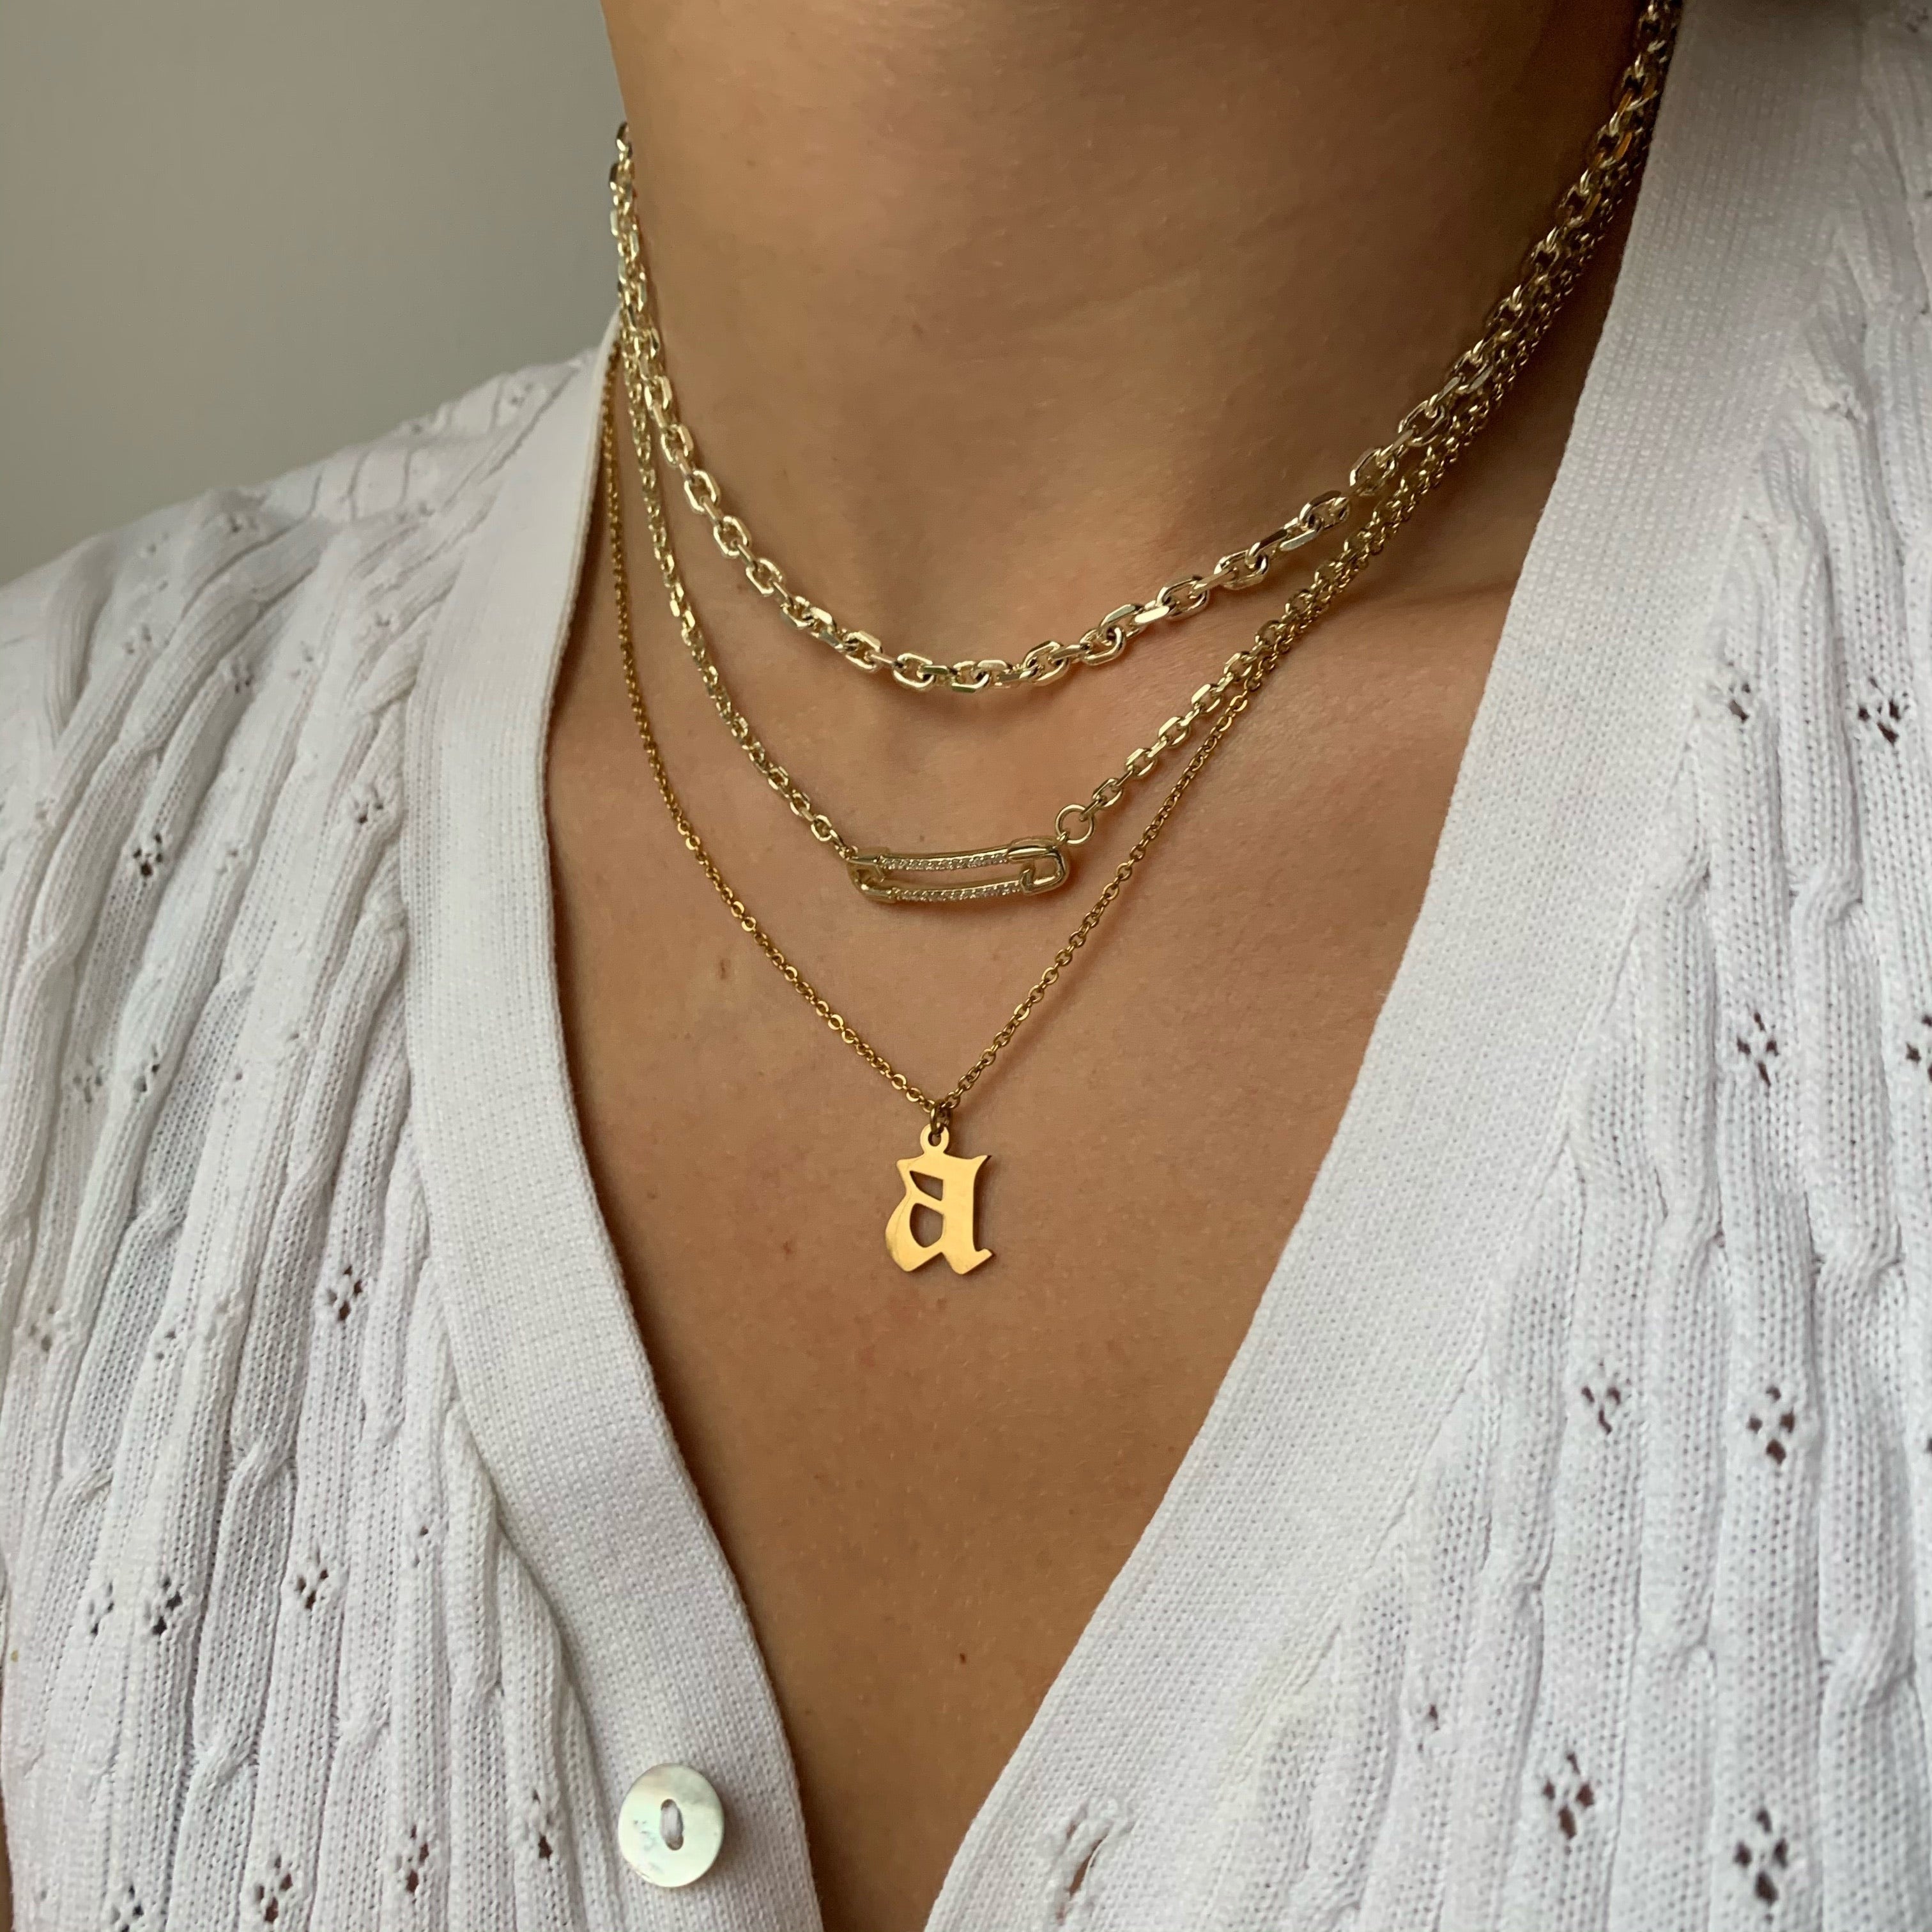 Call Out My Name Necklace